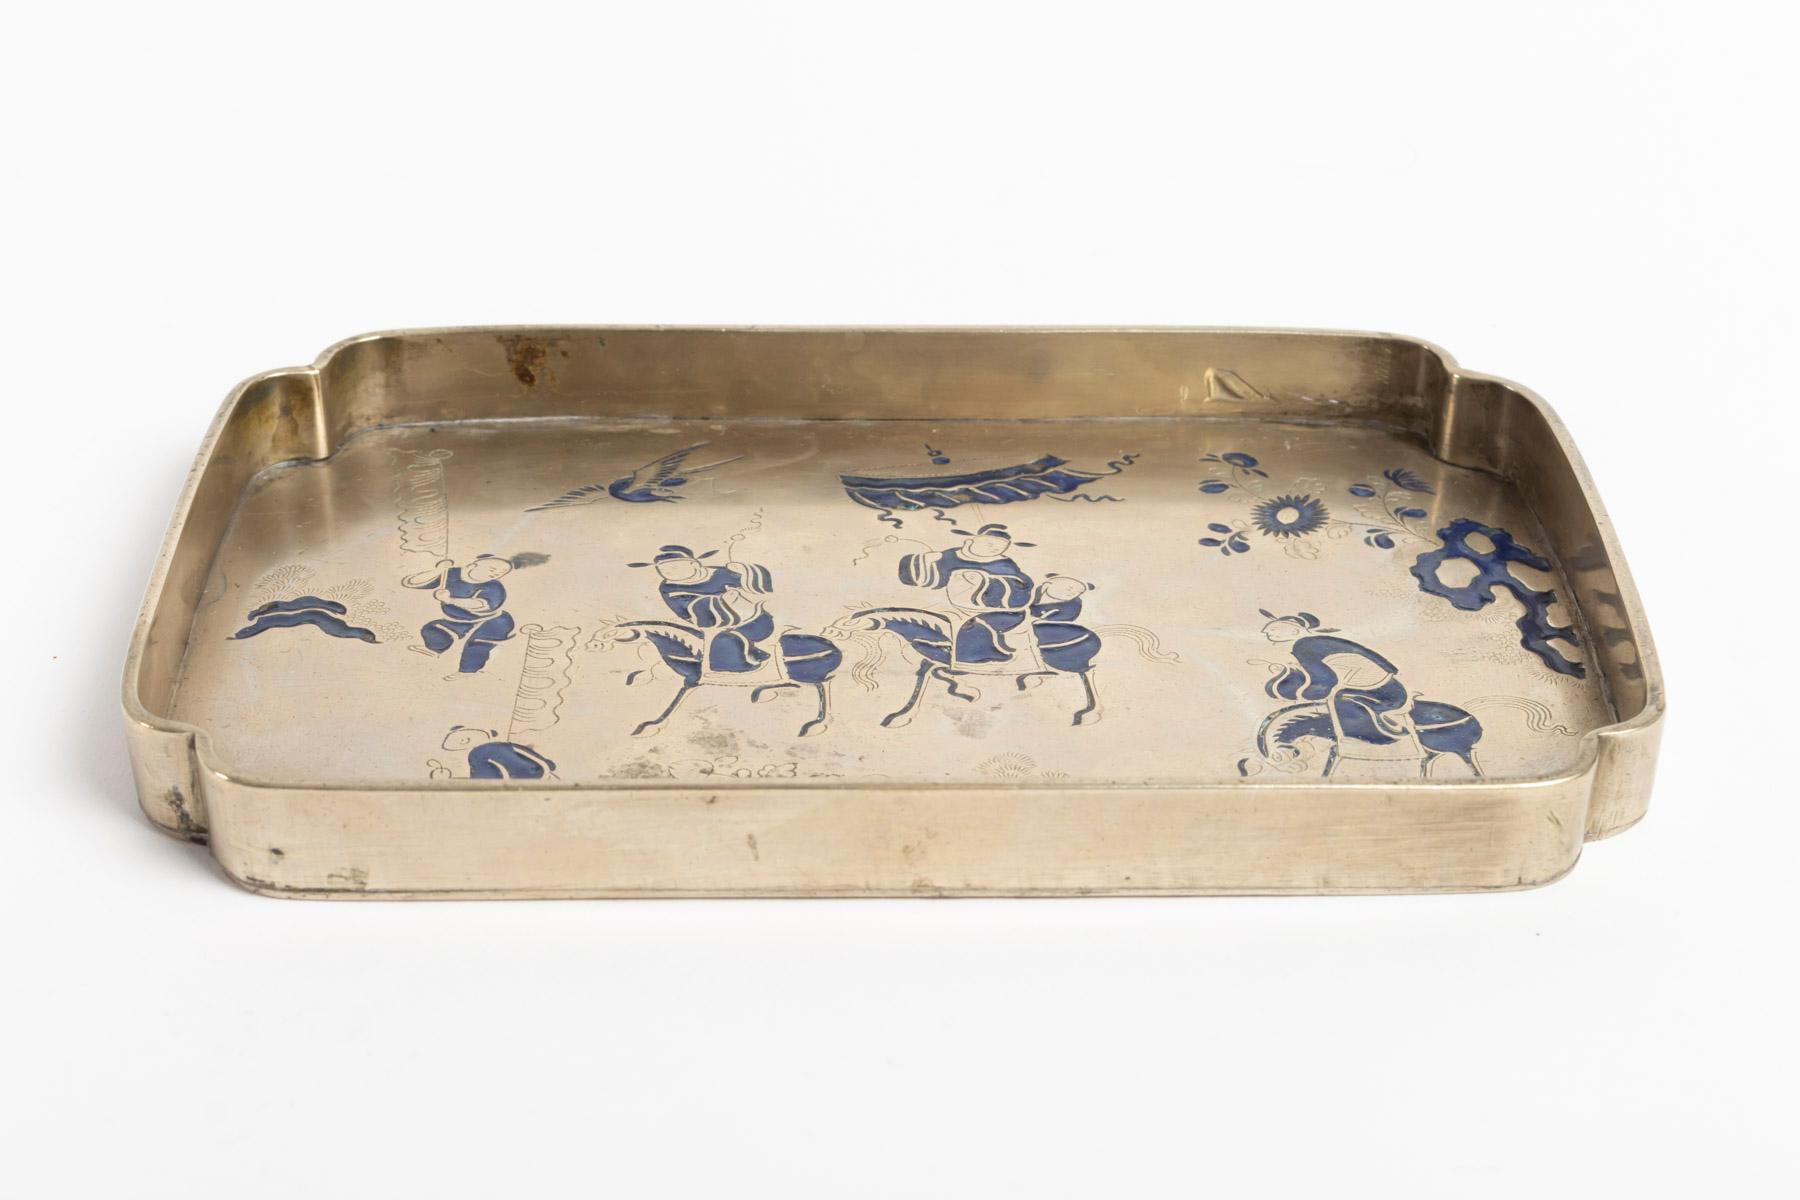 Small Tray Required for Opium Metal White Enameled from a Stage of Blue Horsemen 2